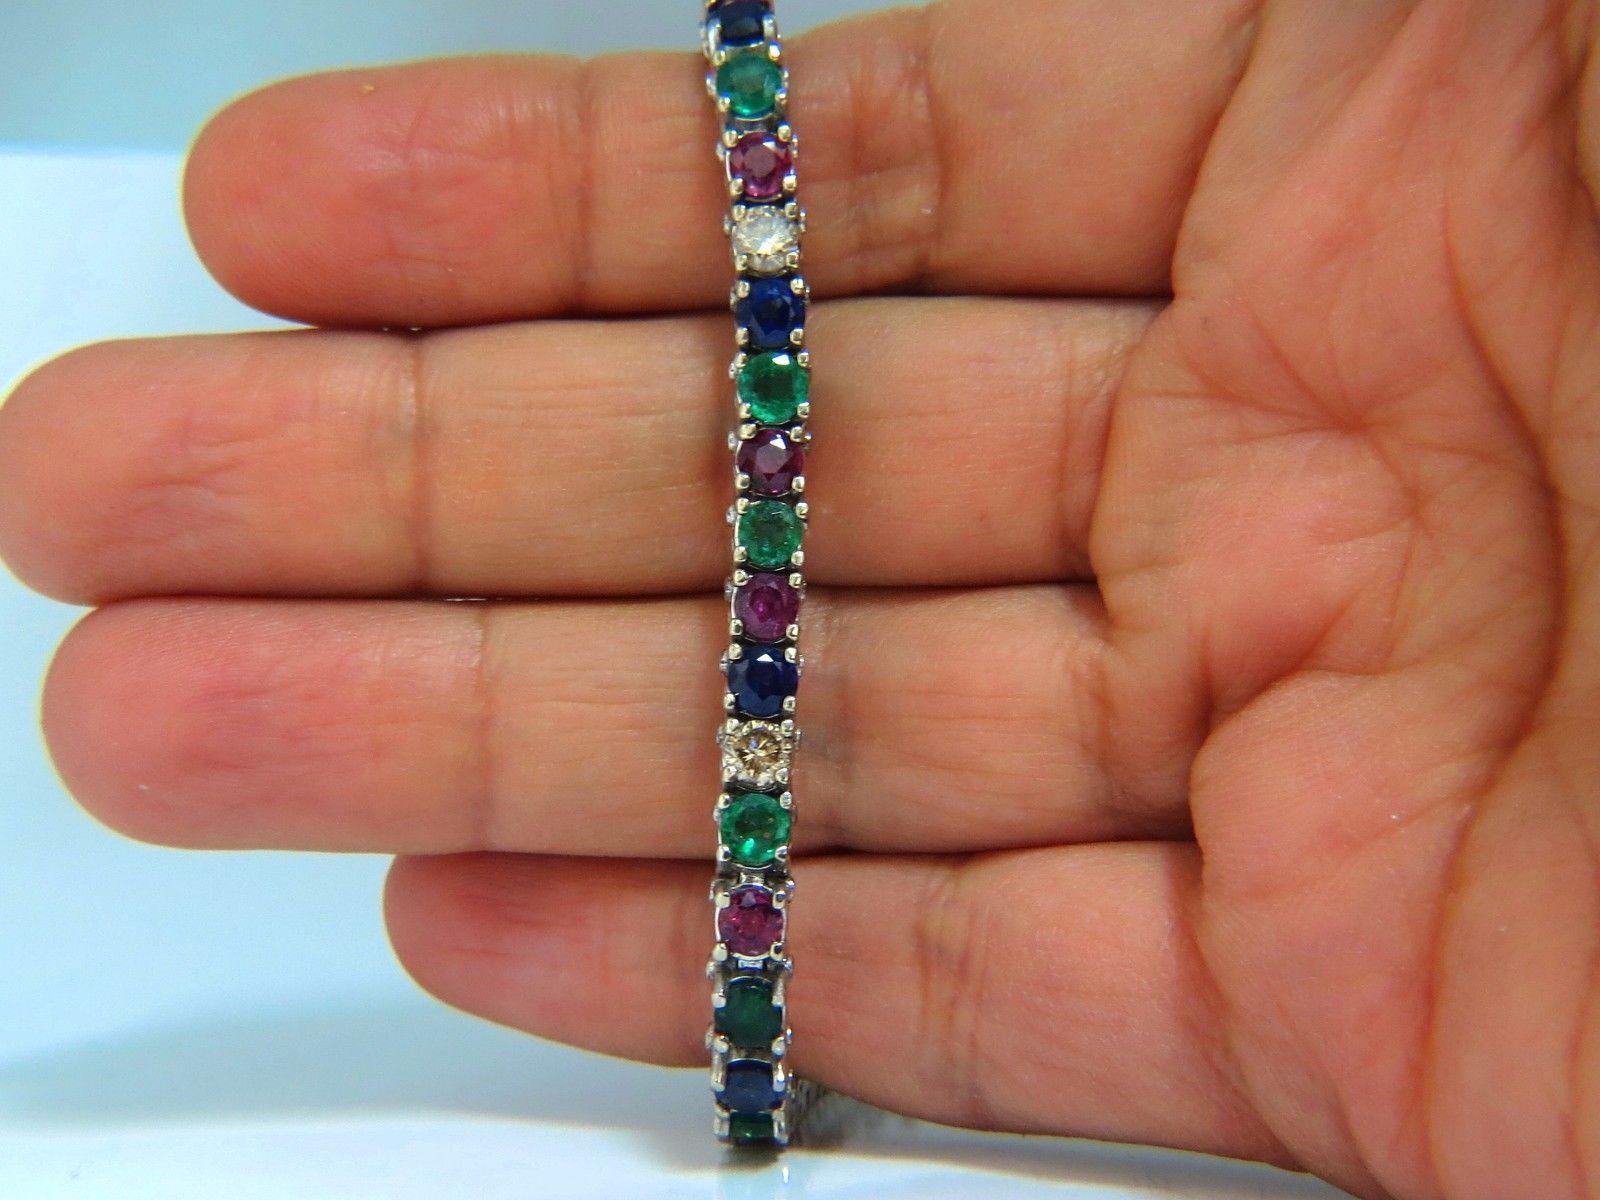 Gem Line.

14.00ct. Natural Sapphires, Ruby, & Emeralds bracelet.

Full round cuts, great sparkle.

Vibrant Greens, Reds, yellows, Blues & Pinks

Clean Clarity & Transparent.

1.20ct (5) Fancy light brown diamonds. 

Secure pressure clasp and safety